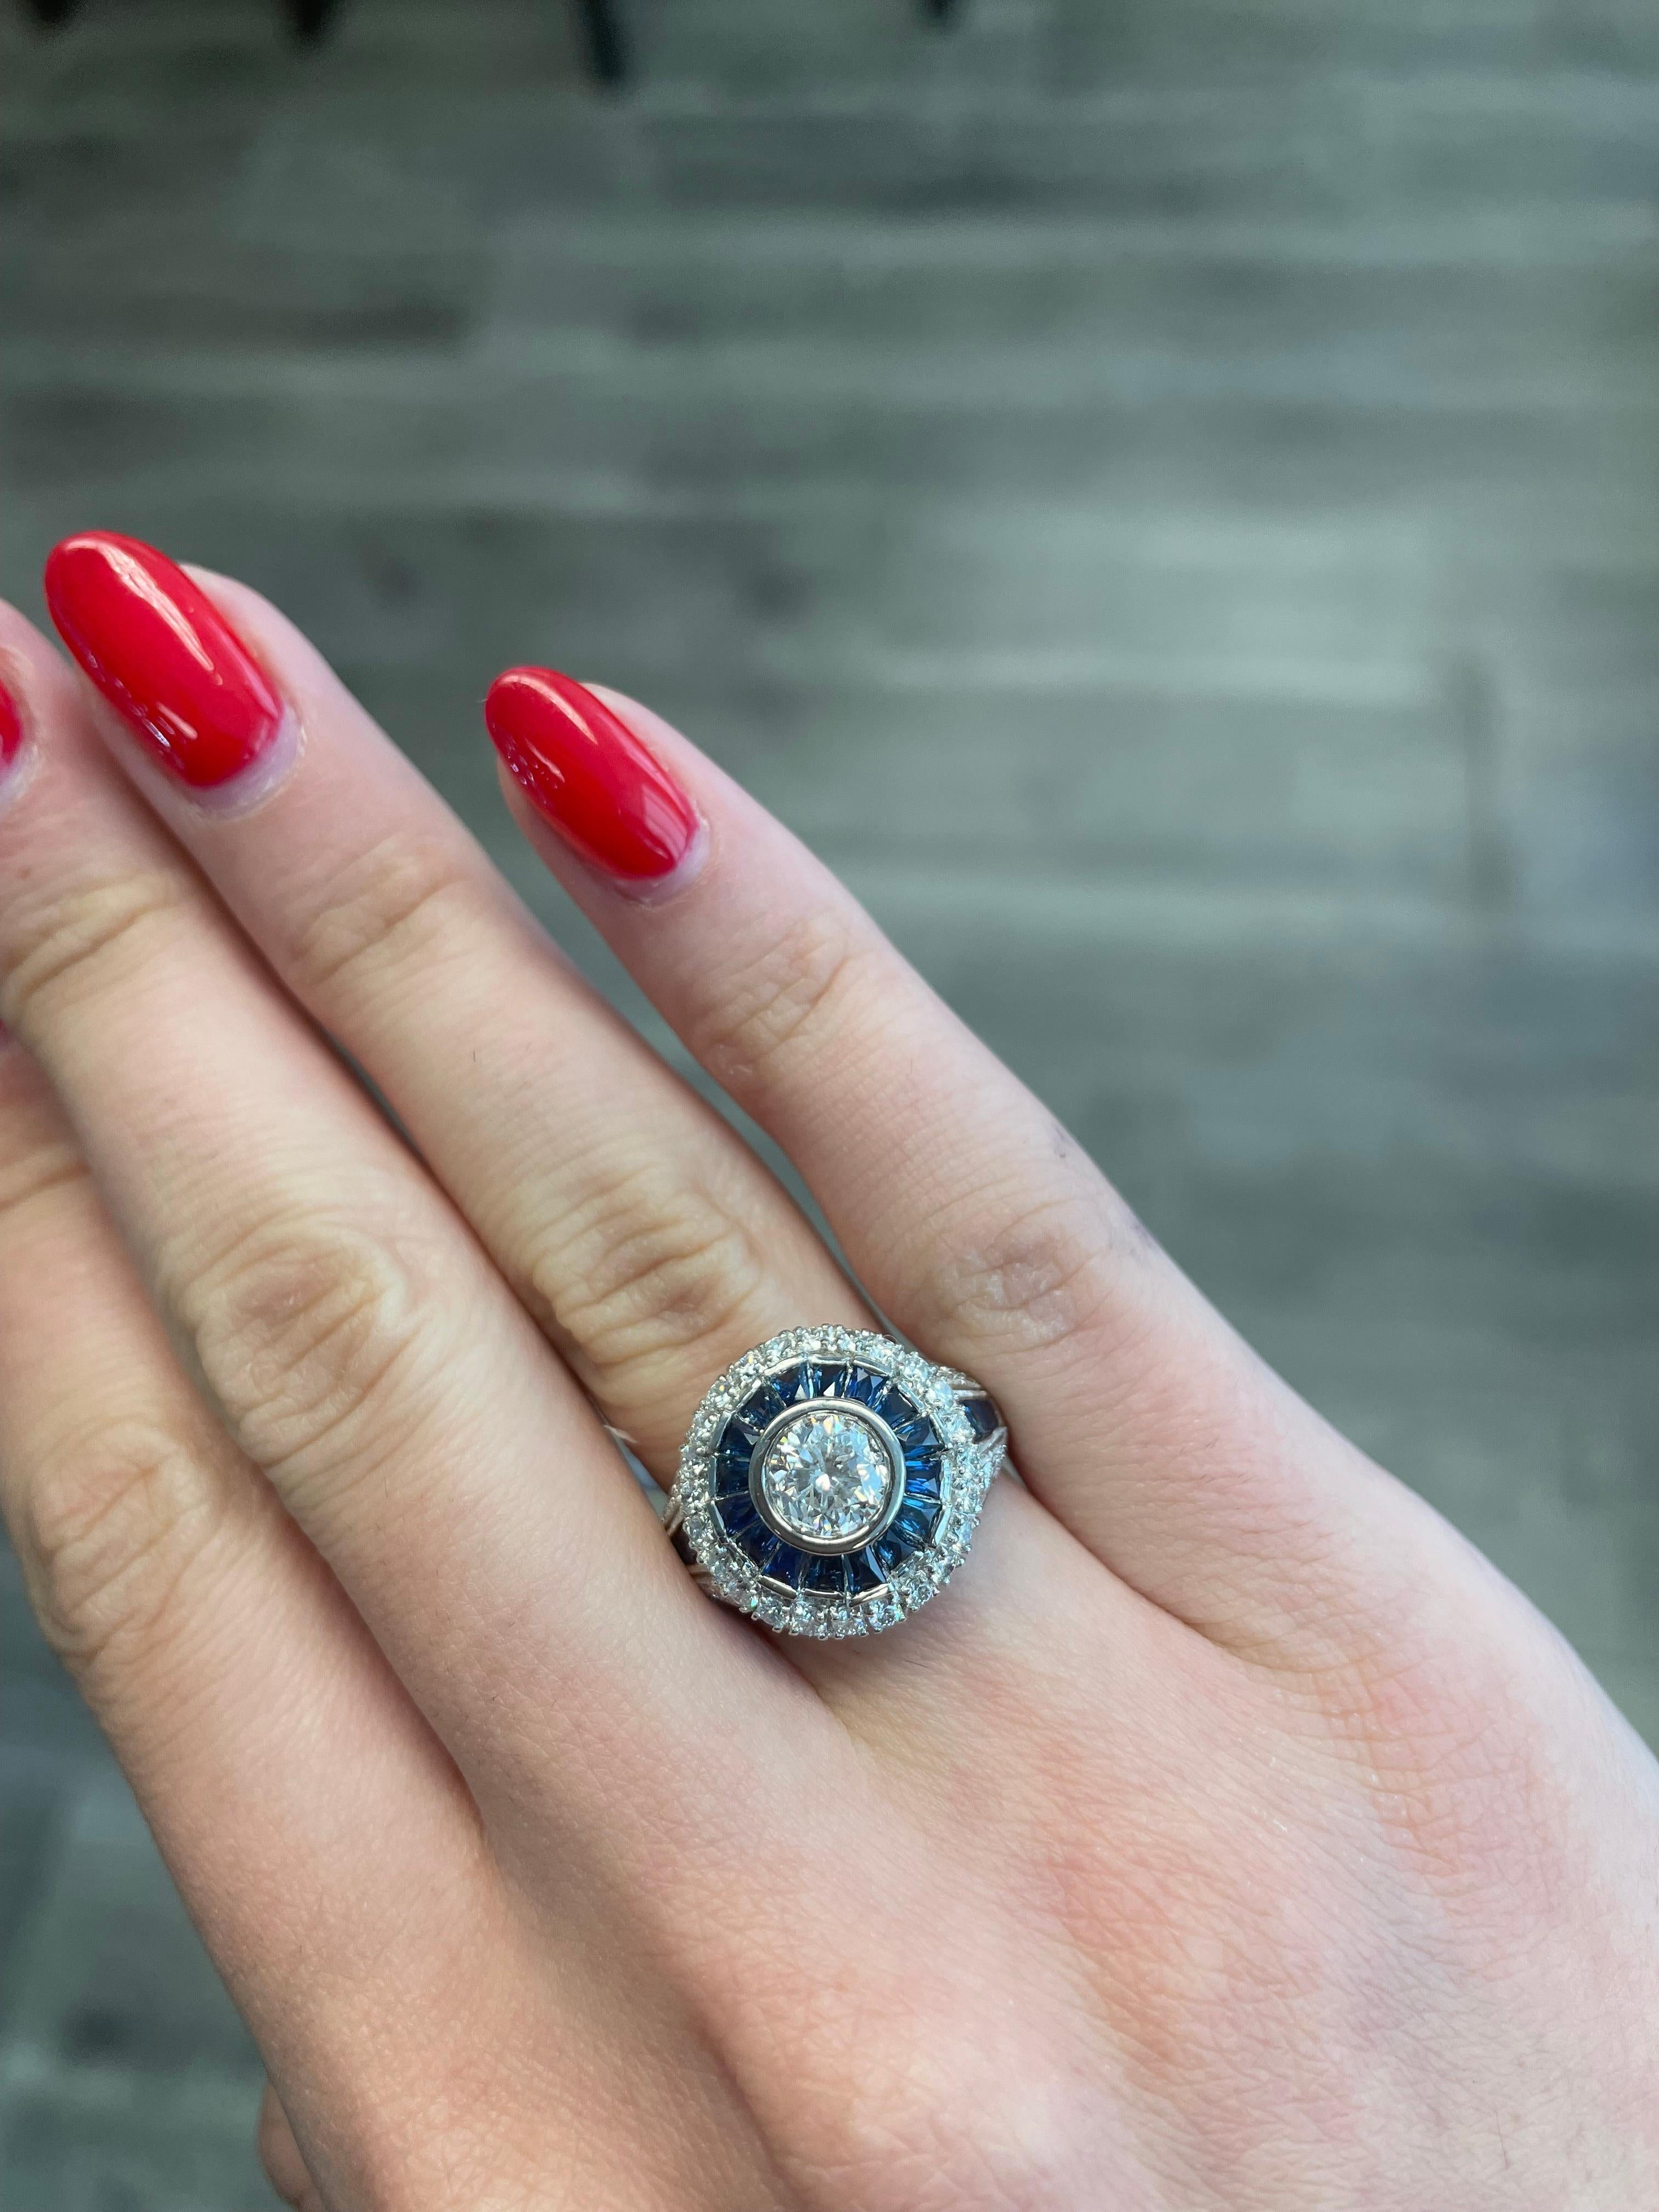 Art Deco inspired ring with a round brilliant cut diamond and French cut sapphires. 
1.00ct center round brilliant cut diamond. Complimented with 0.57ct of round diamonds and 1.25ct of French cut sapphires. 2.82ct total gemstone weight. 18k white